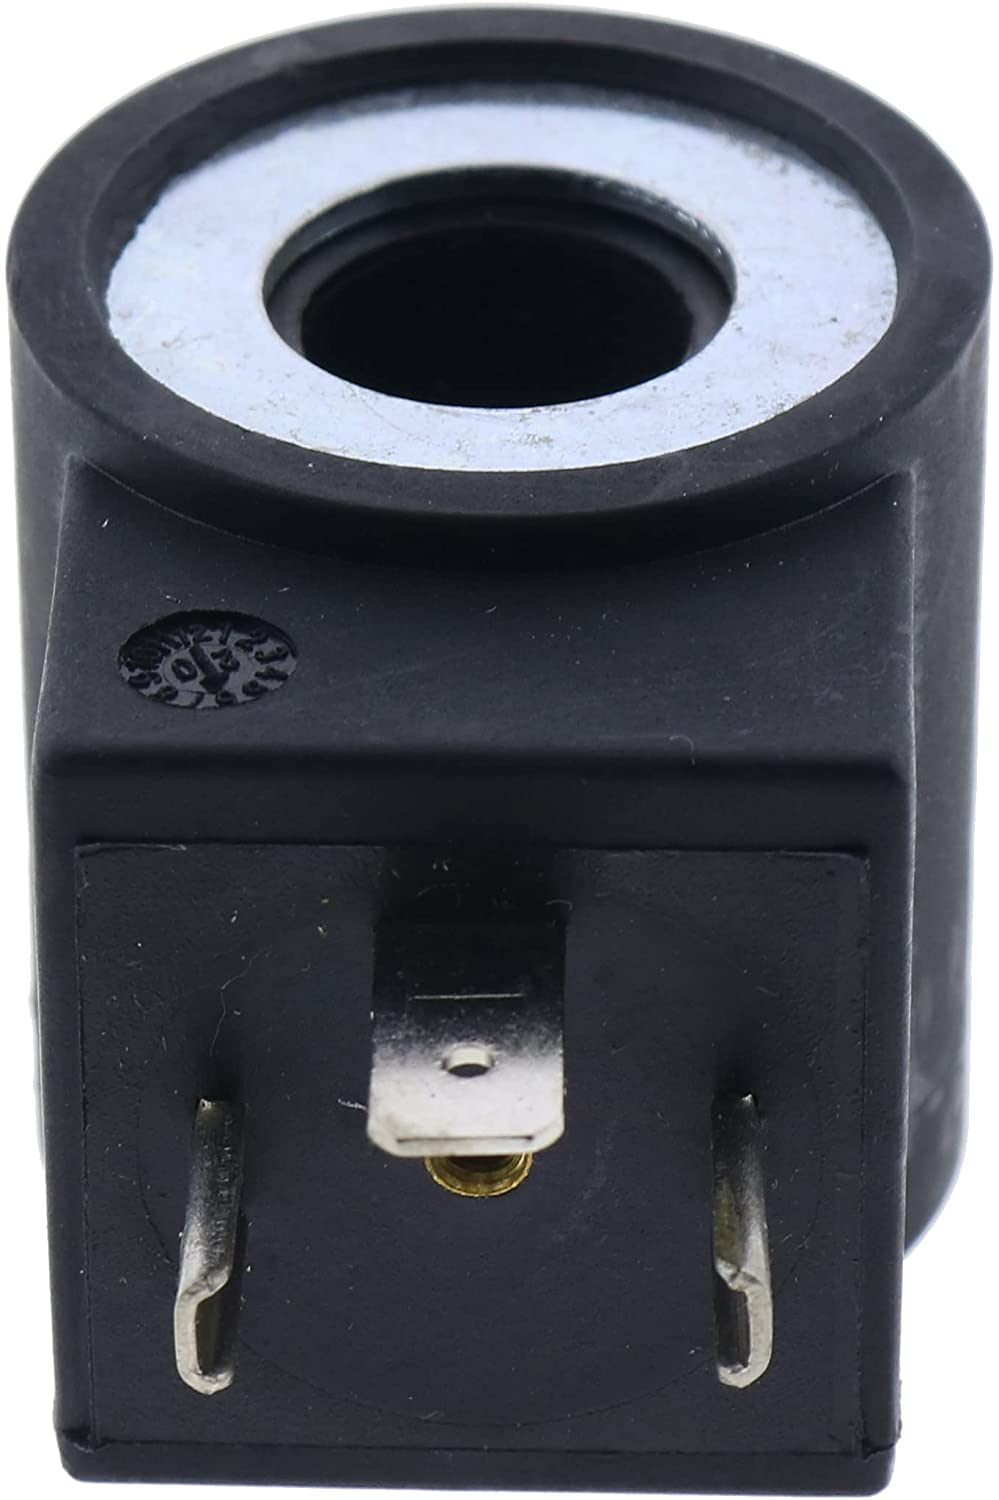 Cylindrical Solenoid Valve Coil (3/4'' Hole) 6306012 with 3 Prongs DIN Connector 24V DC Compatible with HydraForce Valve Stem Series 08 80 88 98 - KUDUPARTS